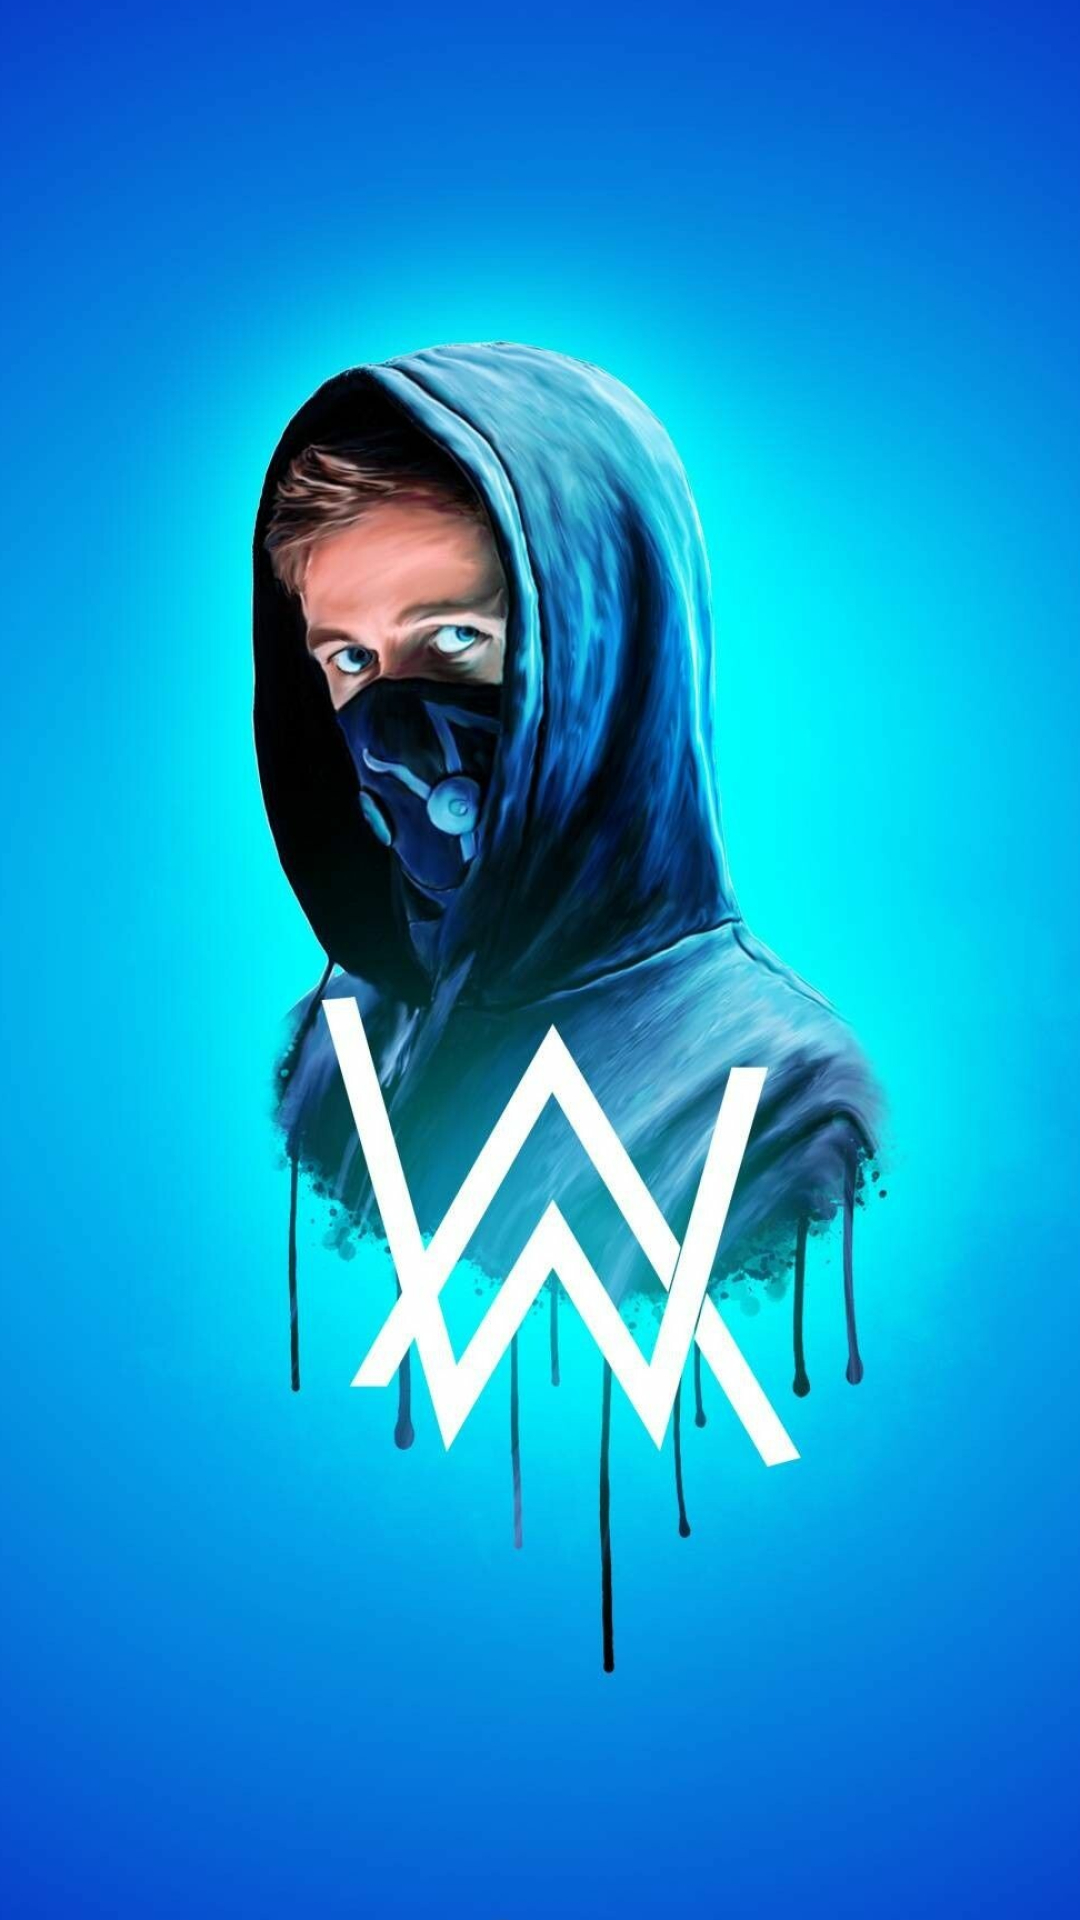 Alan Walker: Faded, Released in December 2015 and sung by Isehin Solheim. 1080x1920 Full HD Background.